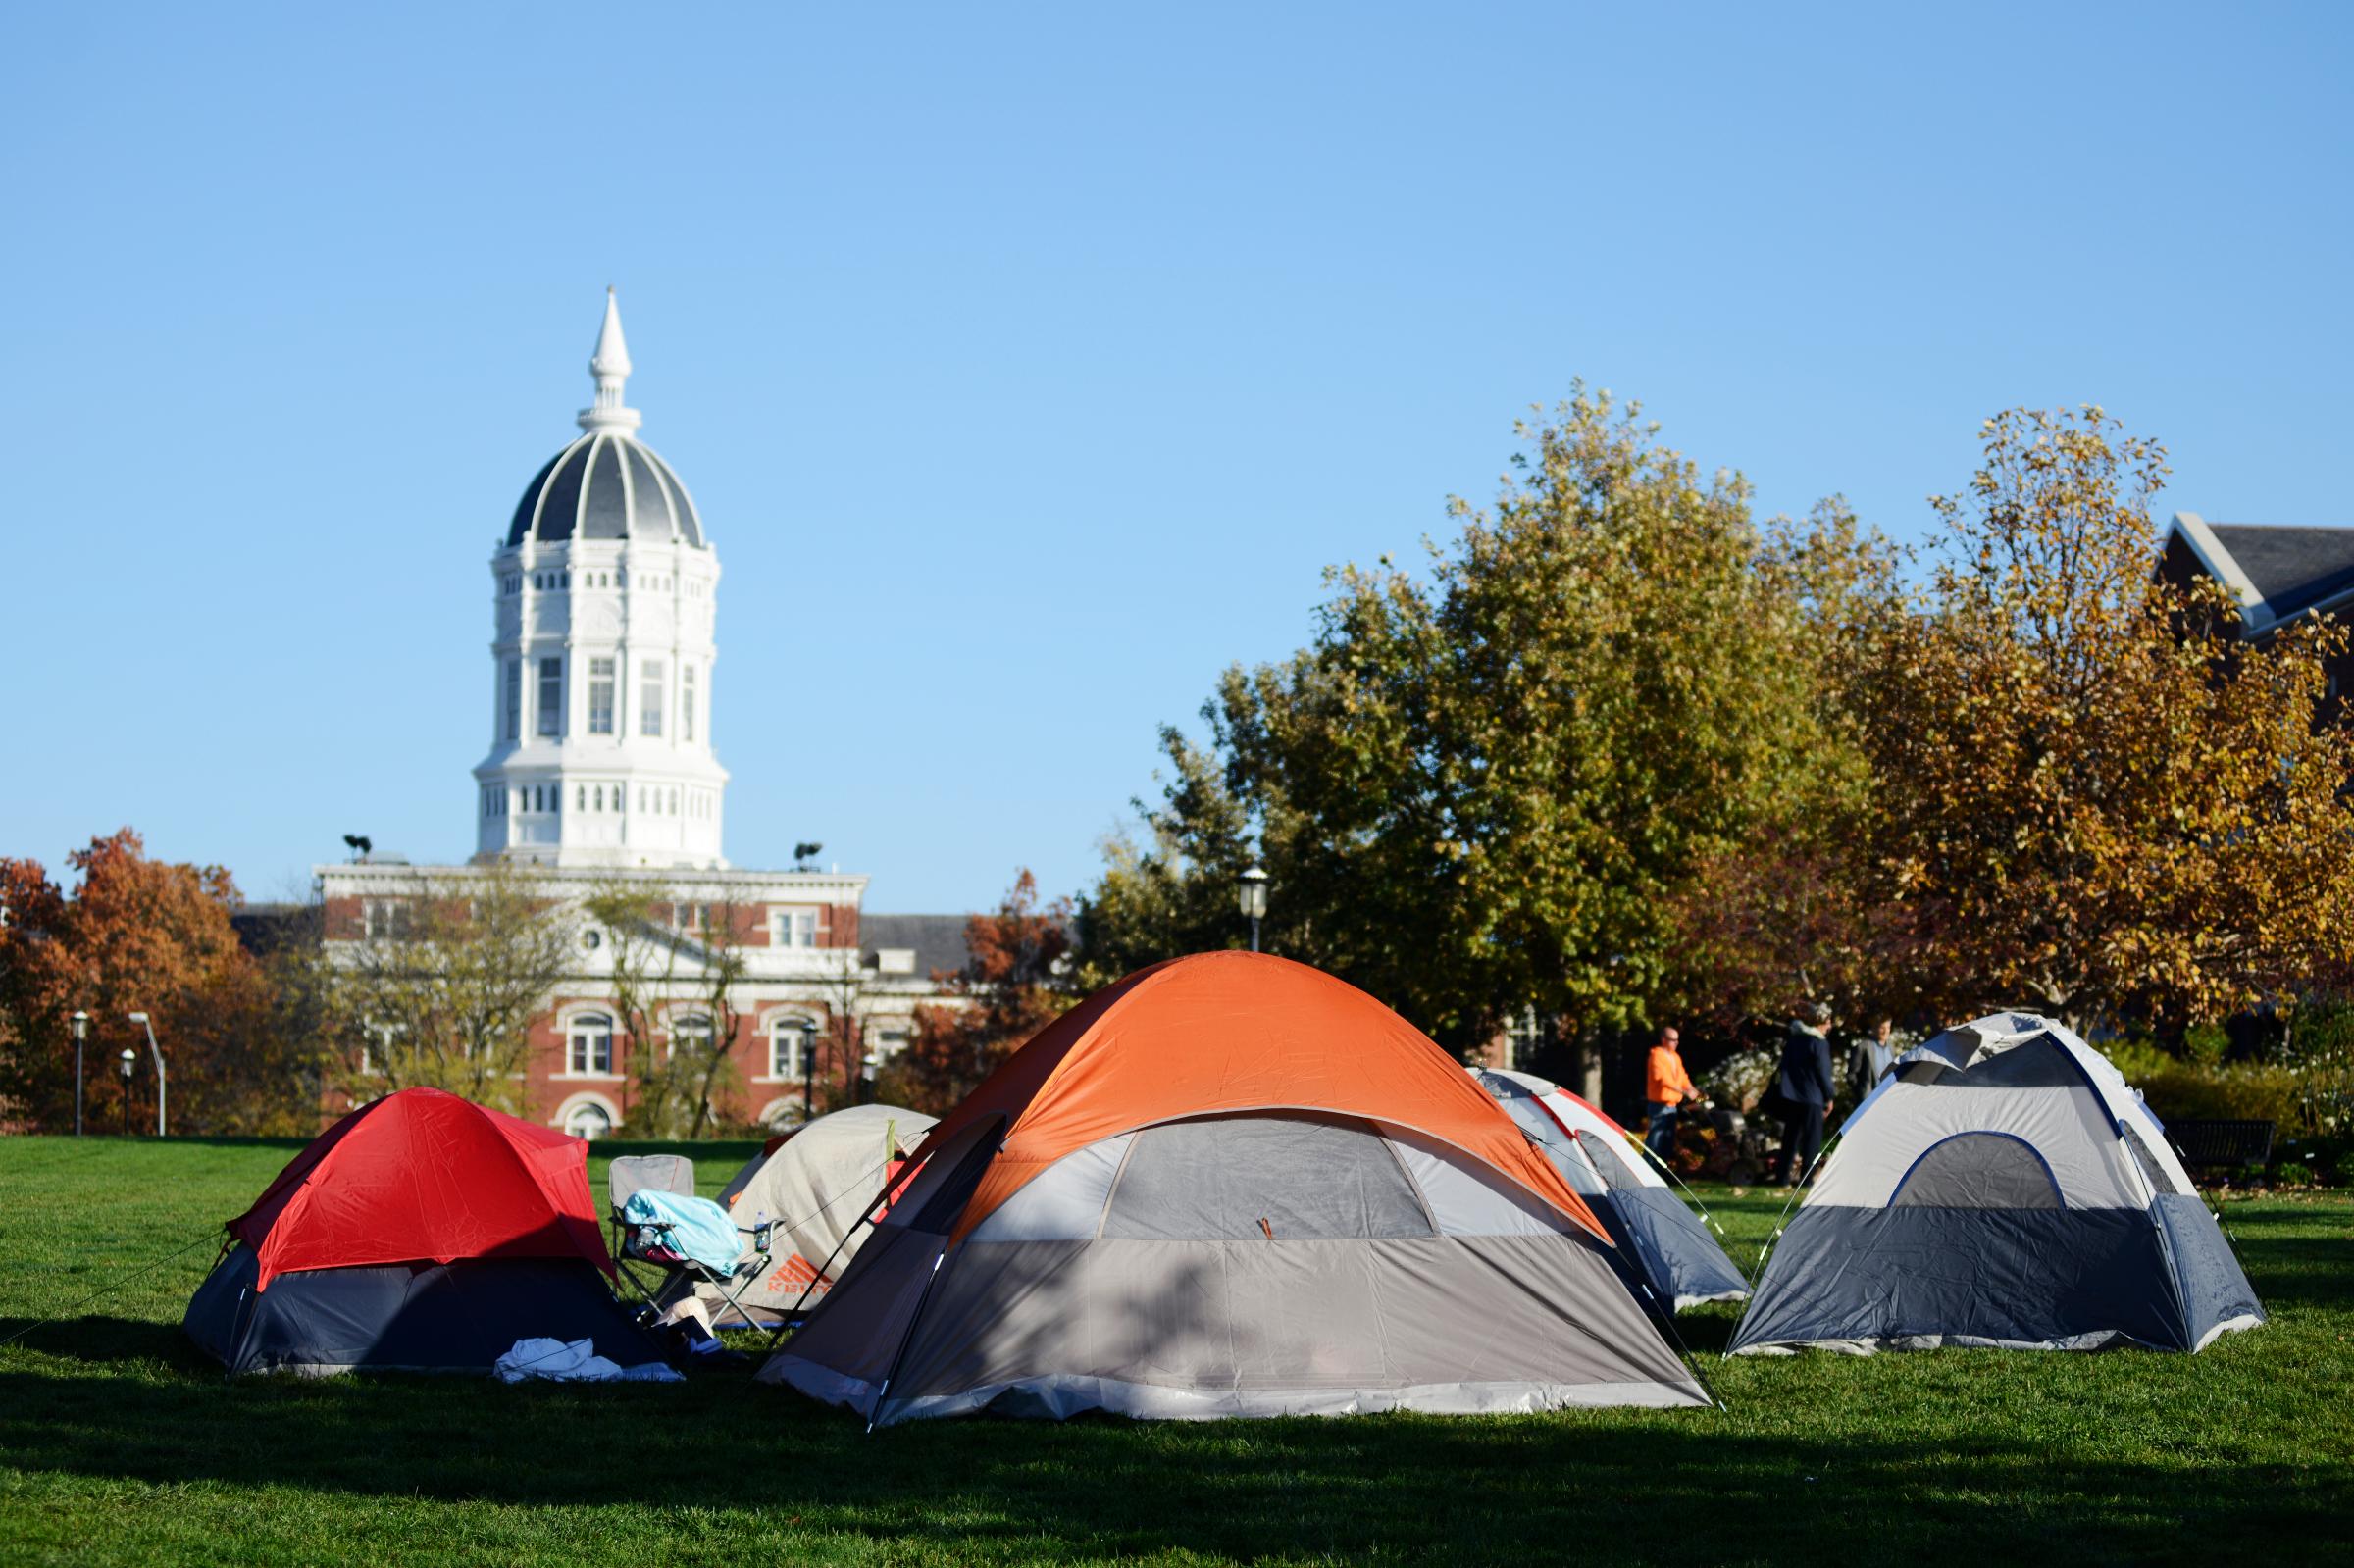 Students from Concerned Student 1950 camp out near Traditions Plaza on Missouri's campus on Nov. 3, 2015 in Columbia, Mo. The students said they would camp until Tim Wolfe, the university's president, was removed from his position.